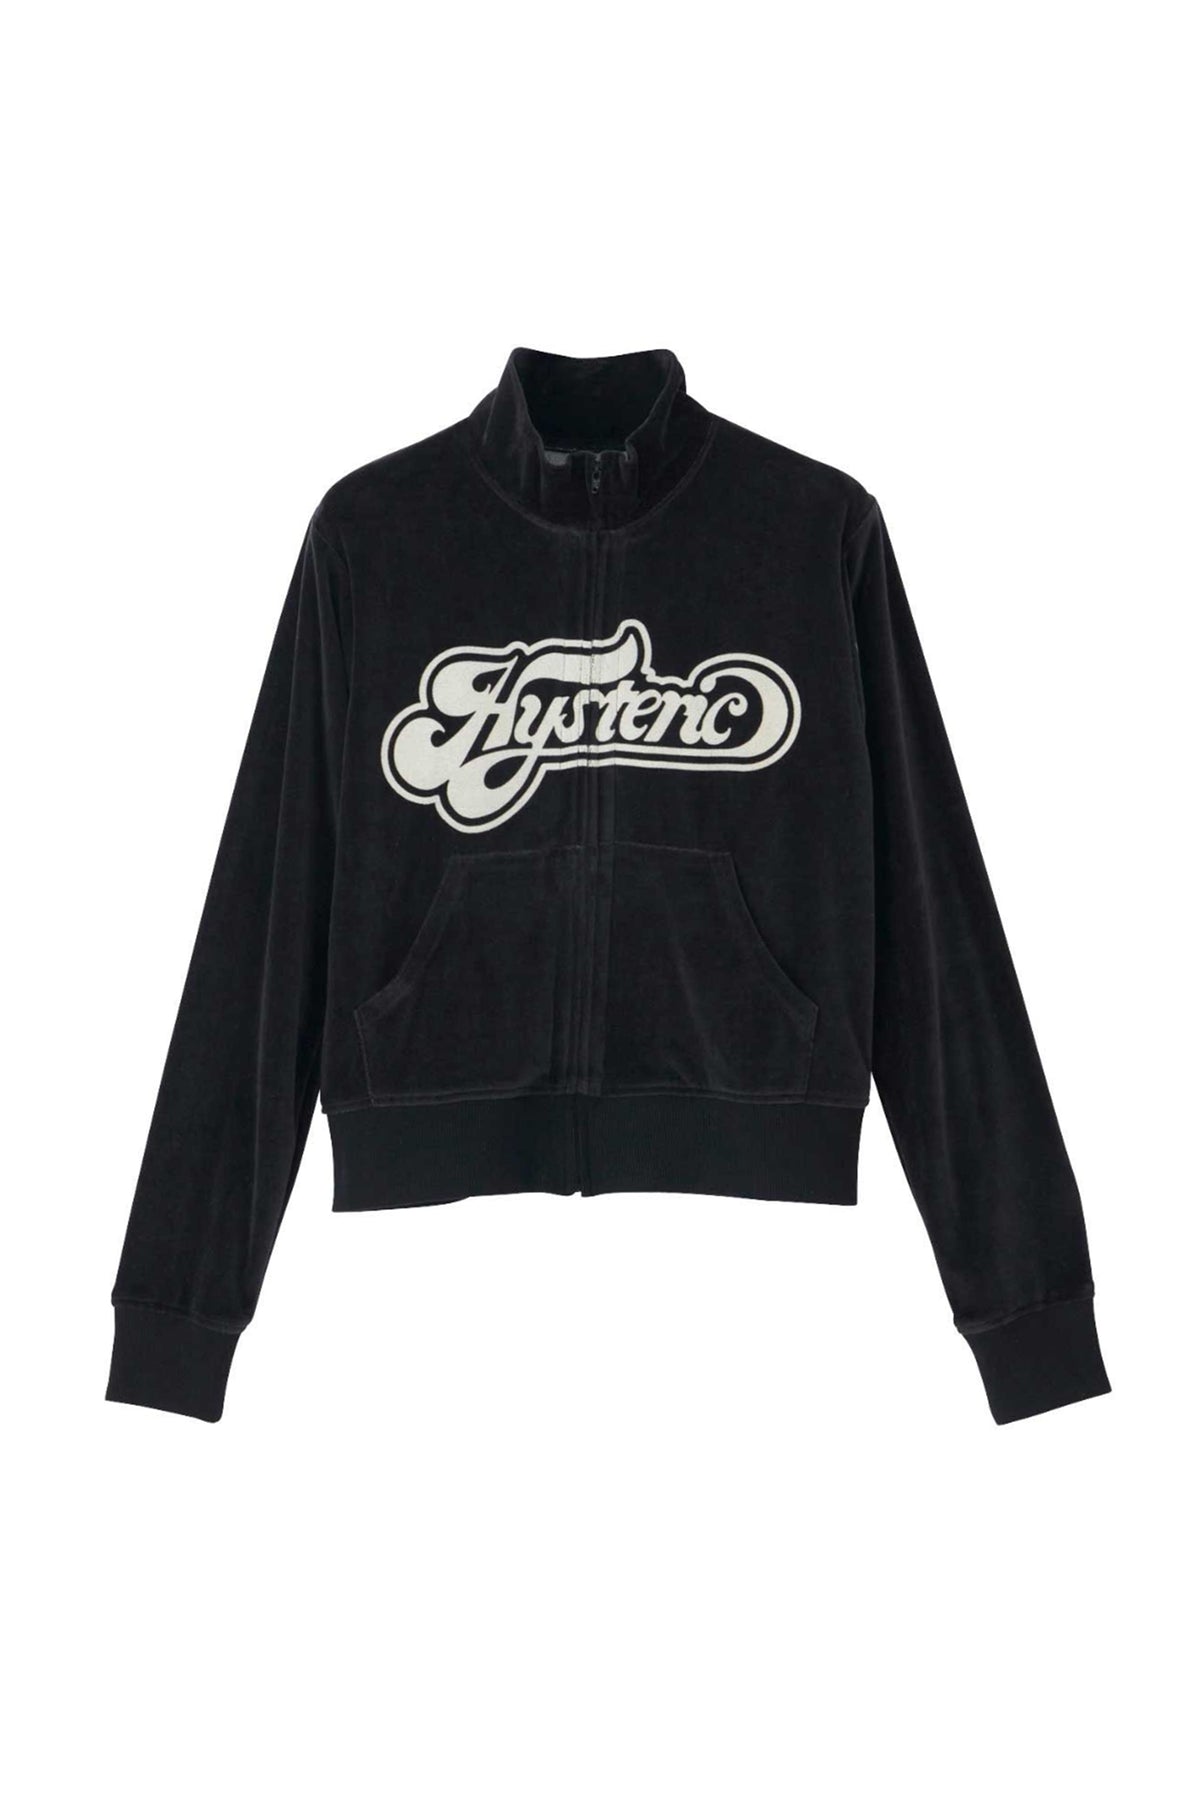 HYSTERIC GLAMOUR CREAMY LOGO TRACK JACKET / BLK